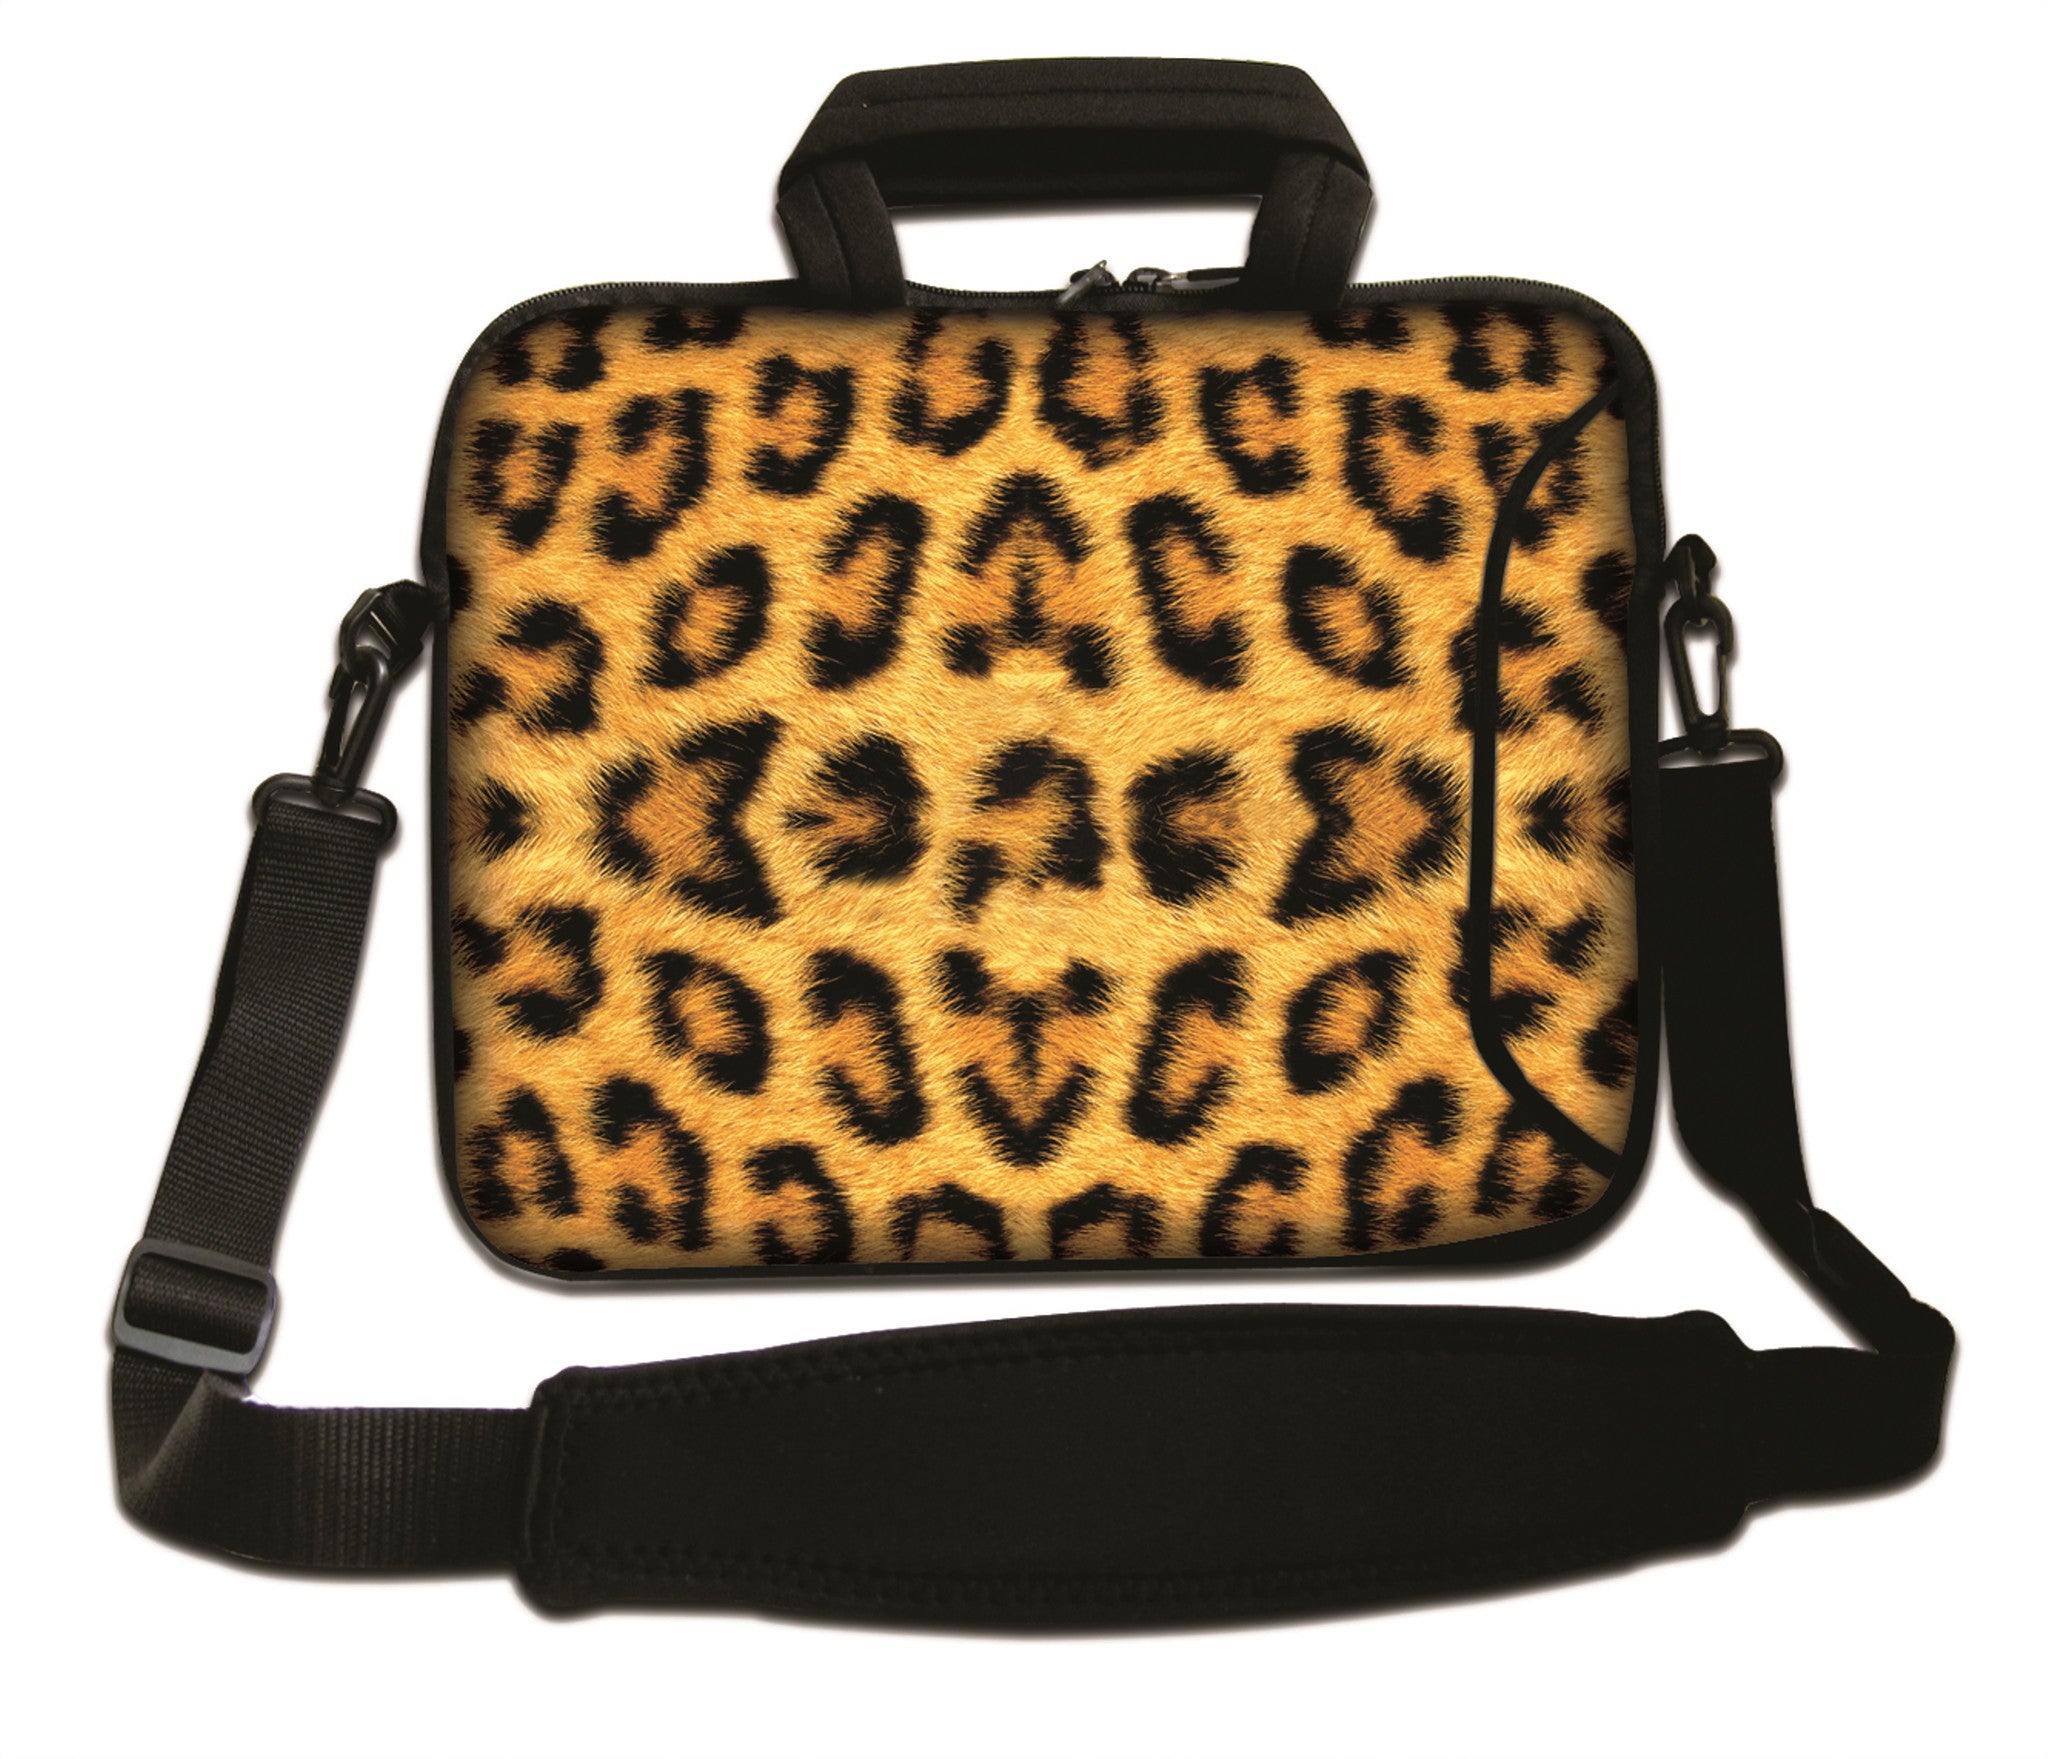 17"- 17.3" (inch) LAPTOP BAG/CASE WITH HANDLE & STRAP, NEOPRENE MADE FOR LAPTOPS/NOTEBOOKS, ZIPPED*PANTHER PATTERN*